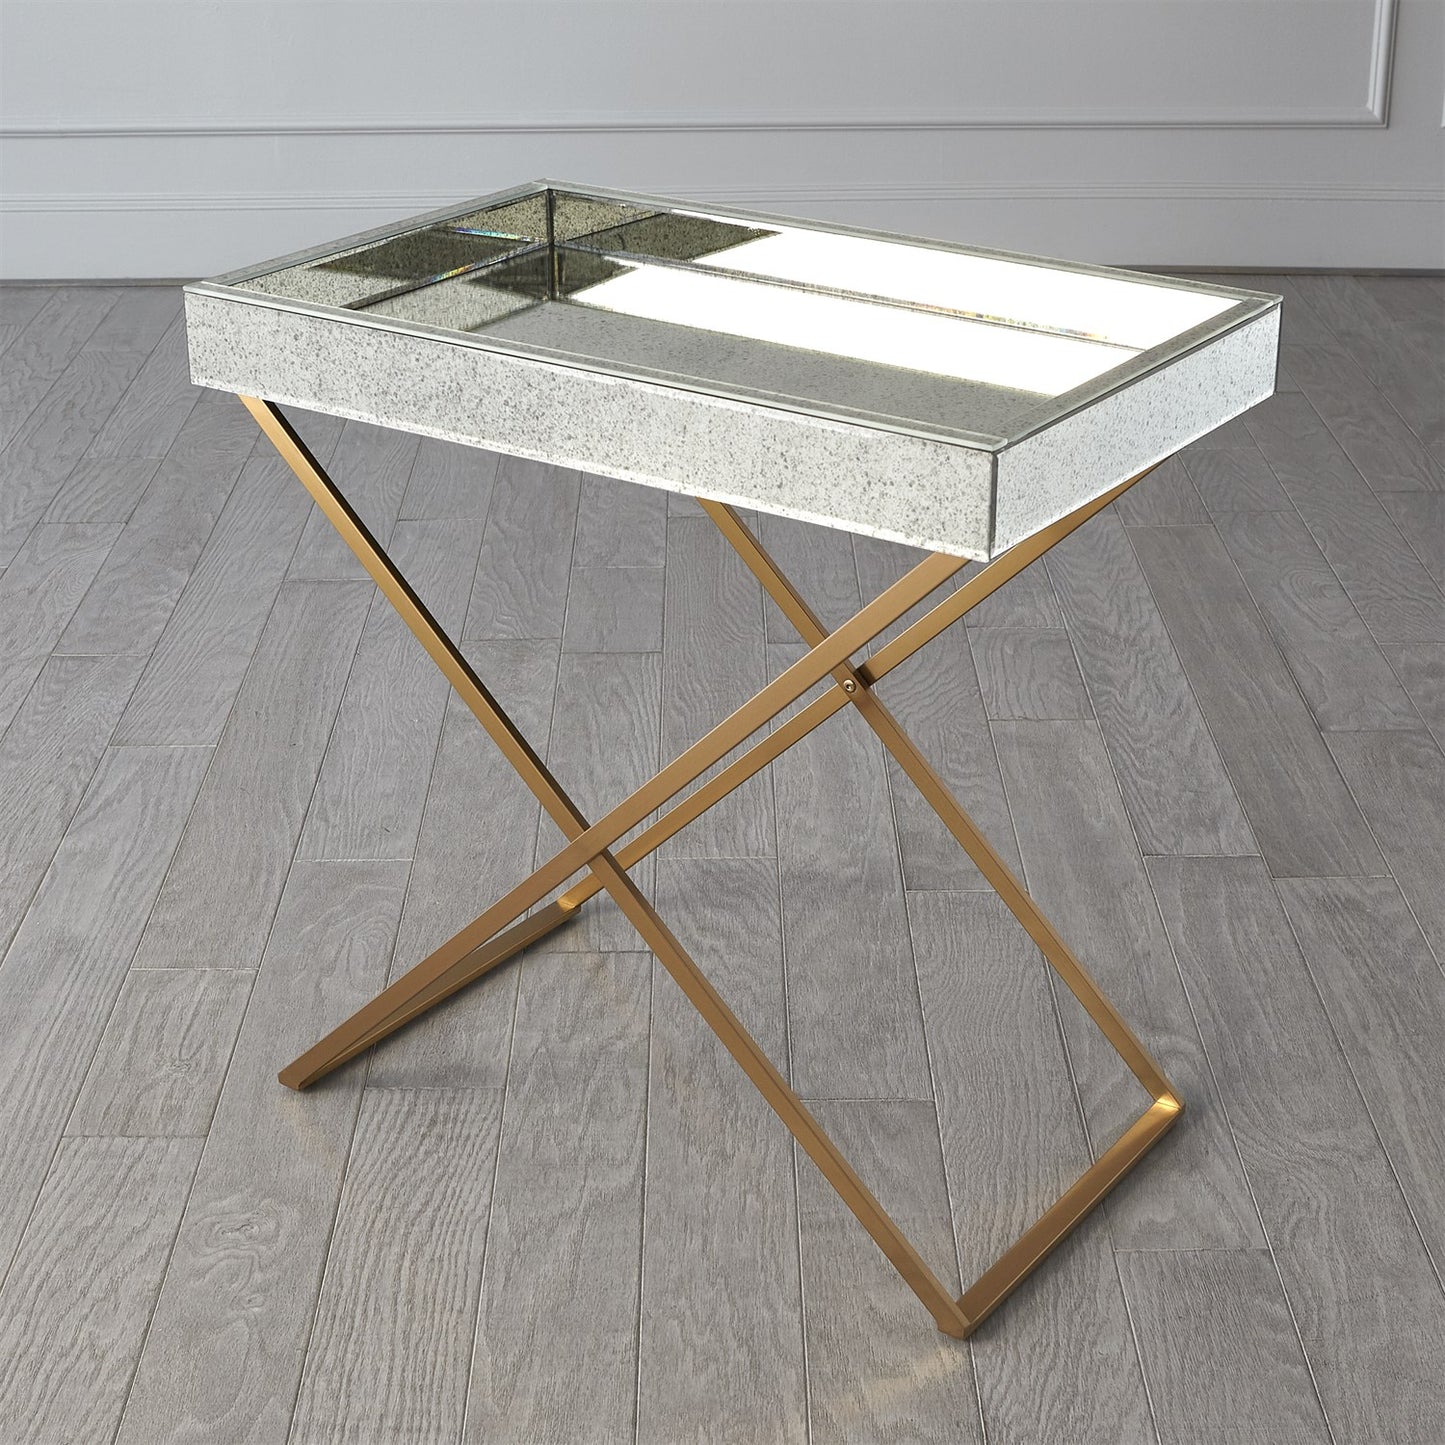 GRAPHITE MIRROR IN NICKEL FOLDING TRAY TABLE